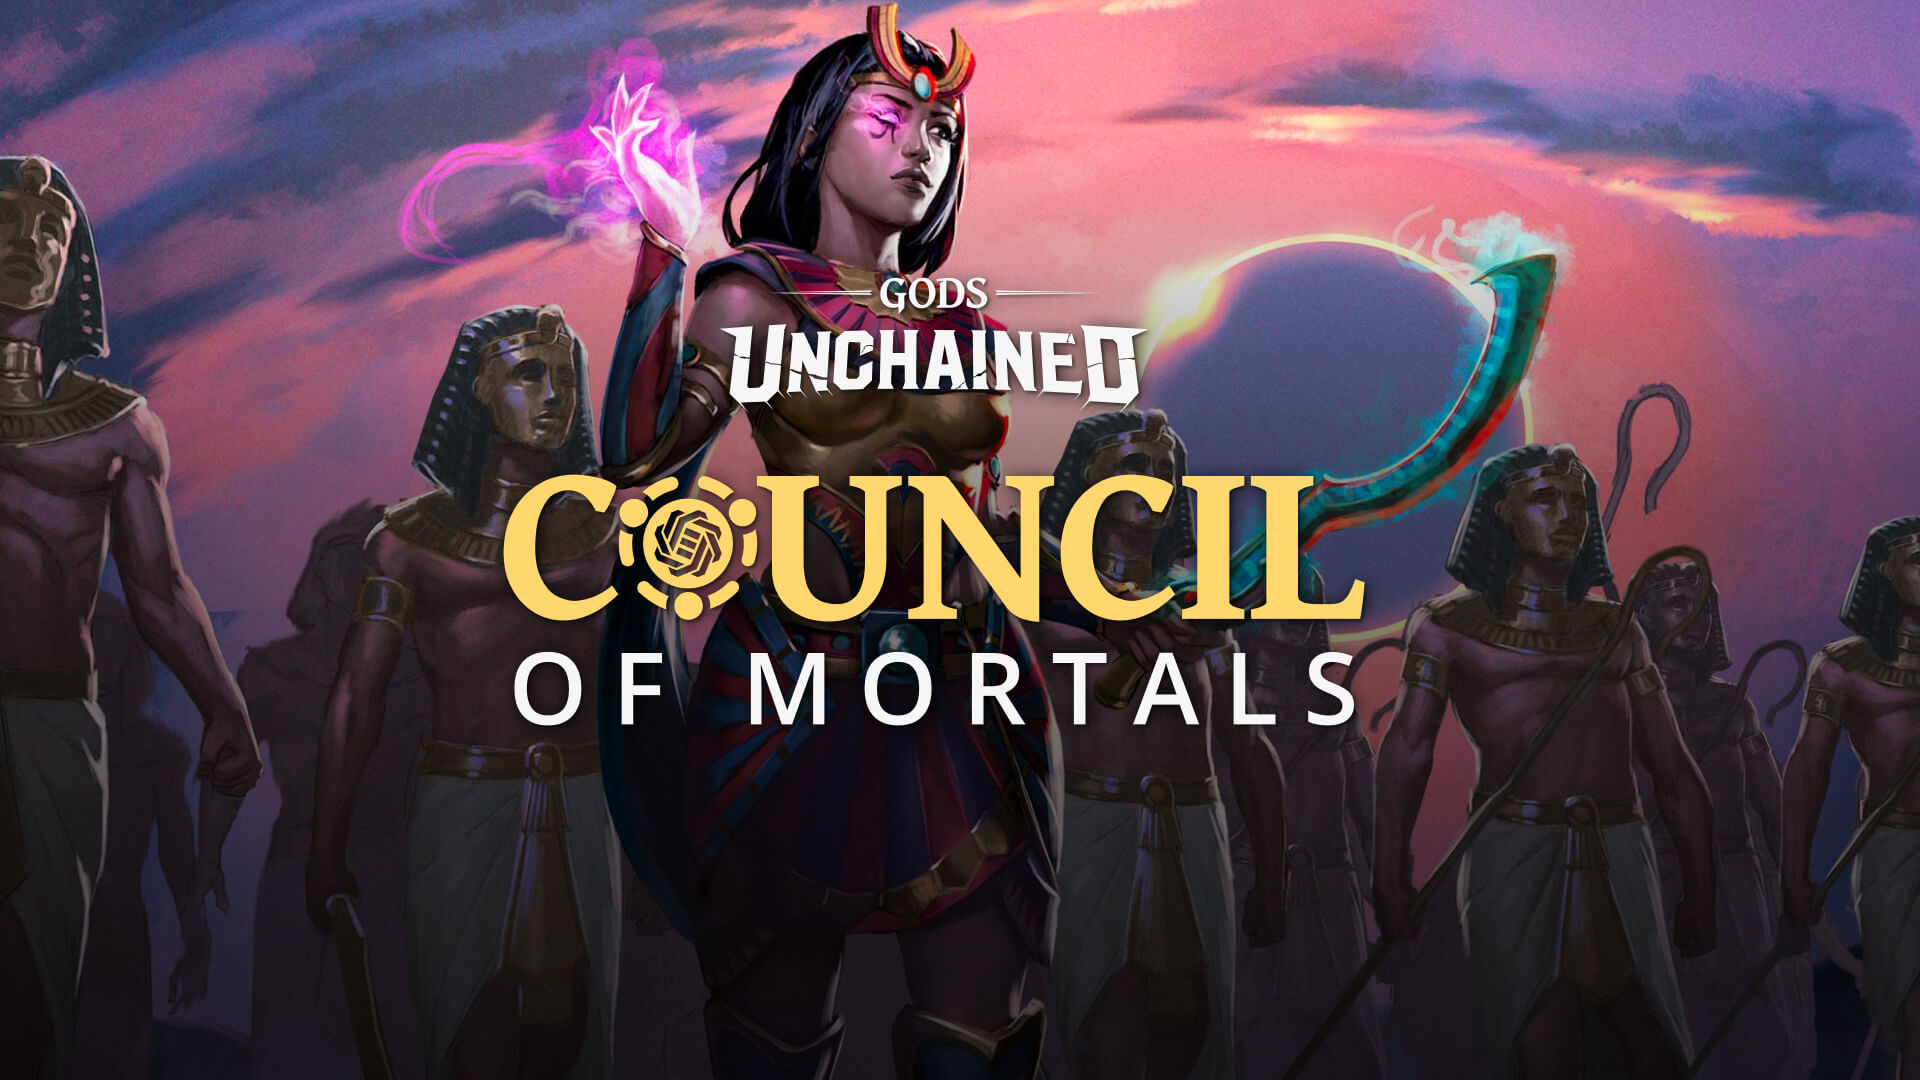 Gods Unchained Council of Mortals